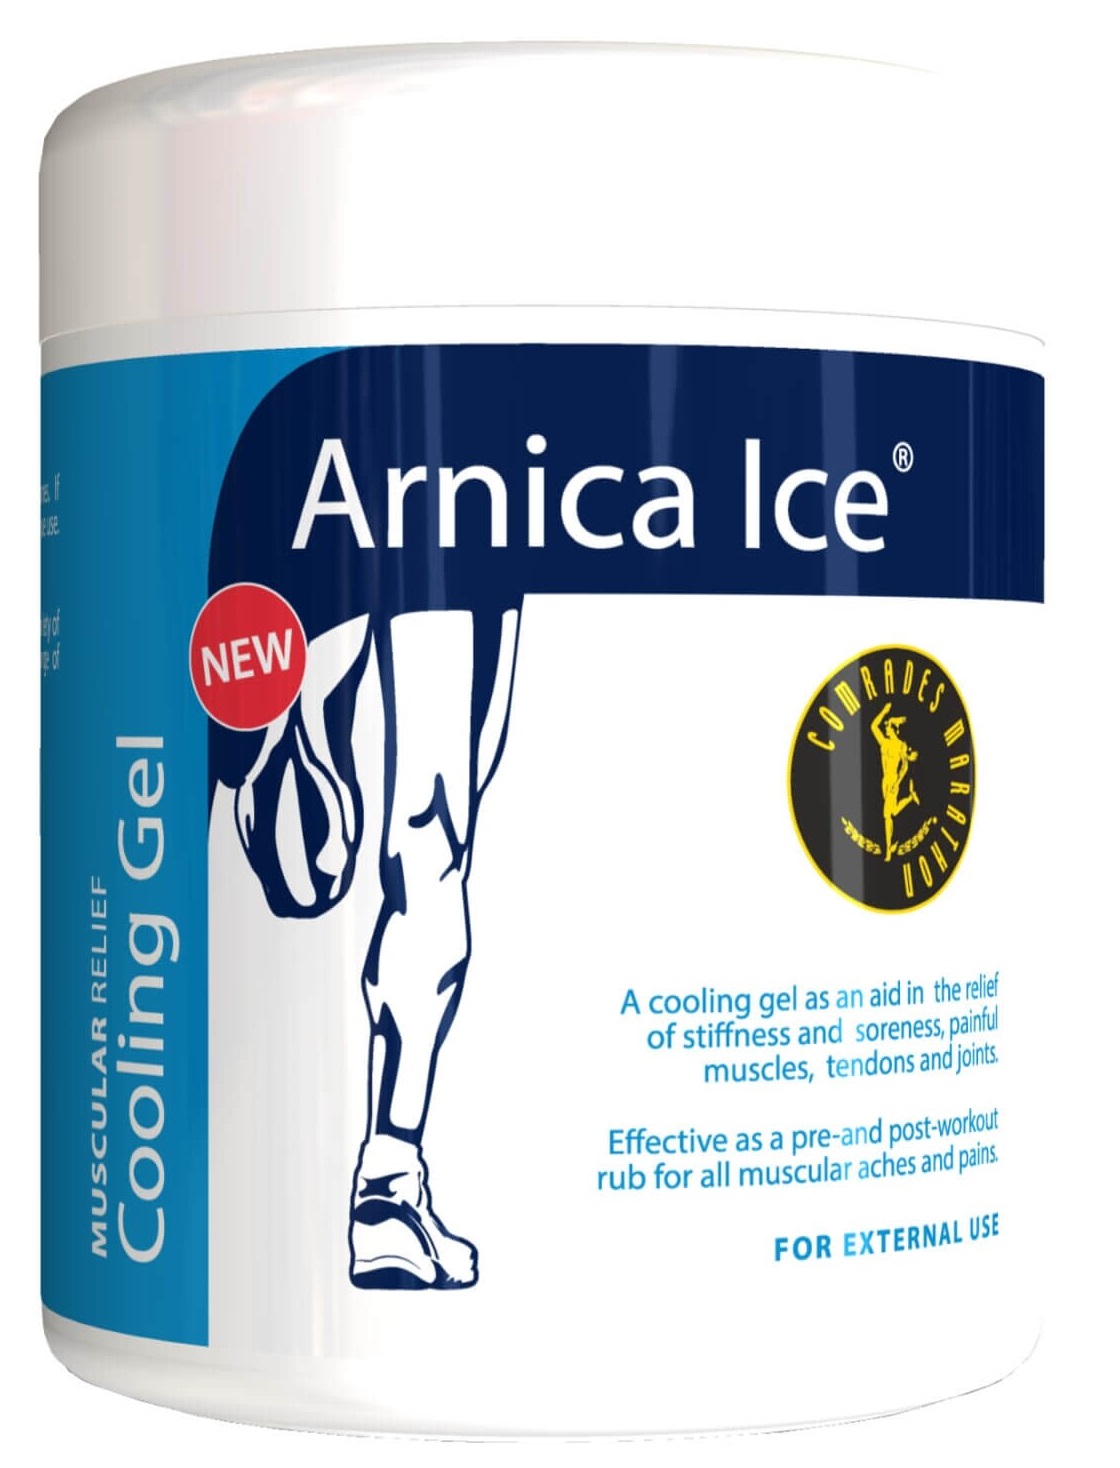 A light, cooling, non-sticky gel made with biodynamically grown organic arnica extracts.